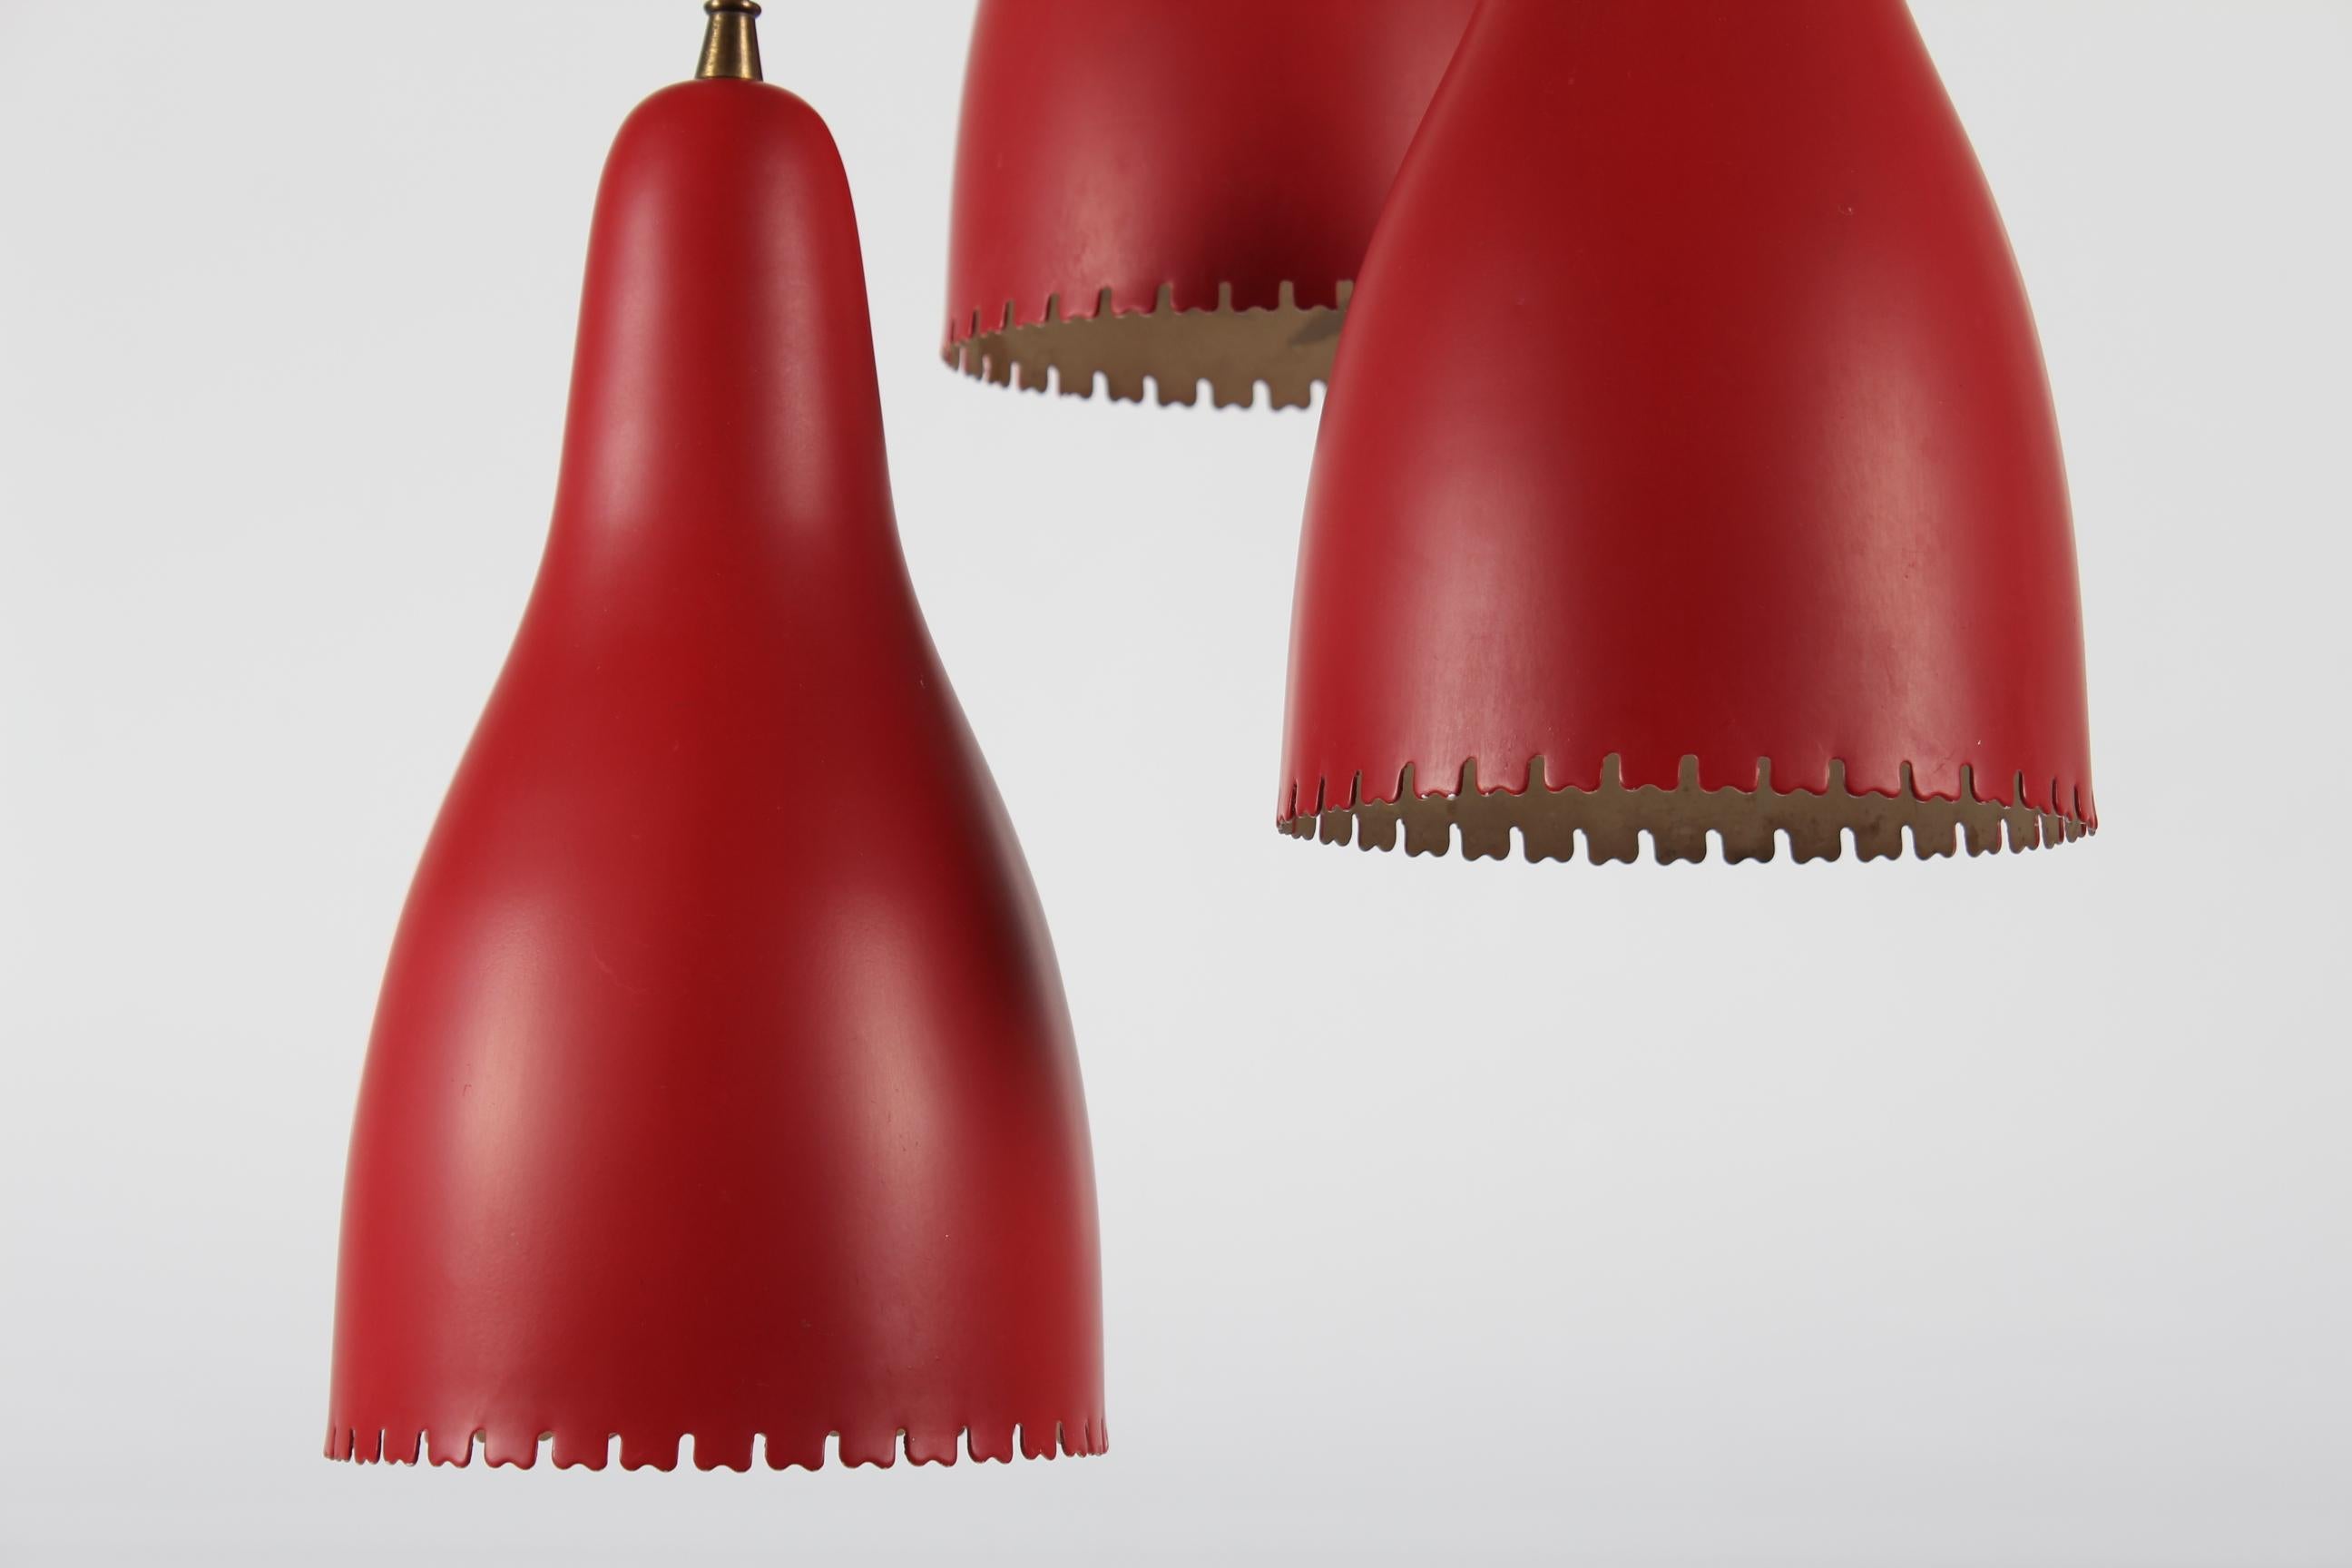 Mid-Century Modern Bent Karlby 3-Cone Chandelier with Red Lacquer Made by Lyfa in Denmarkk, 1950s For Sale